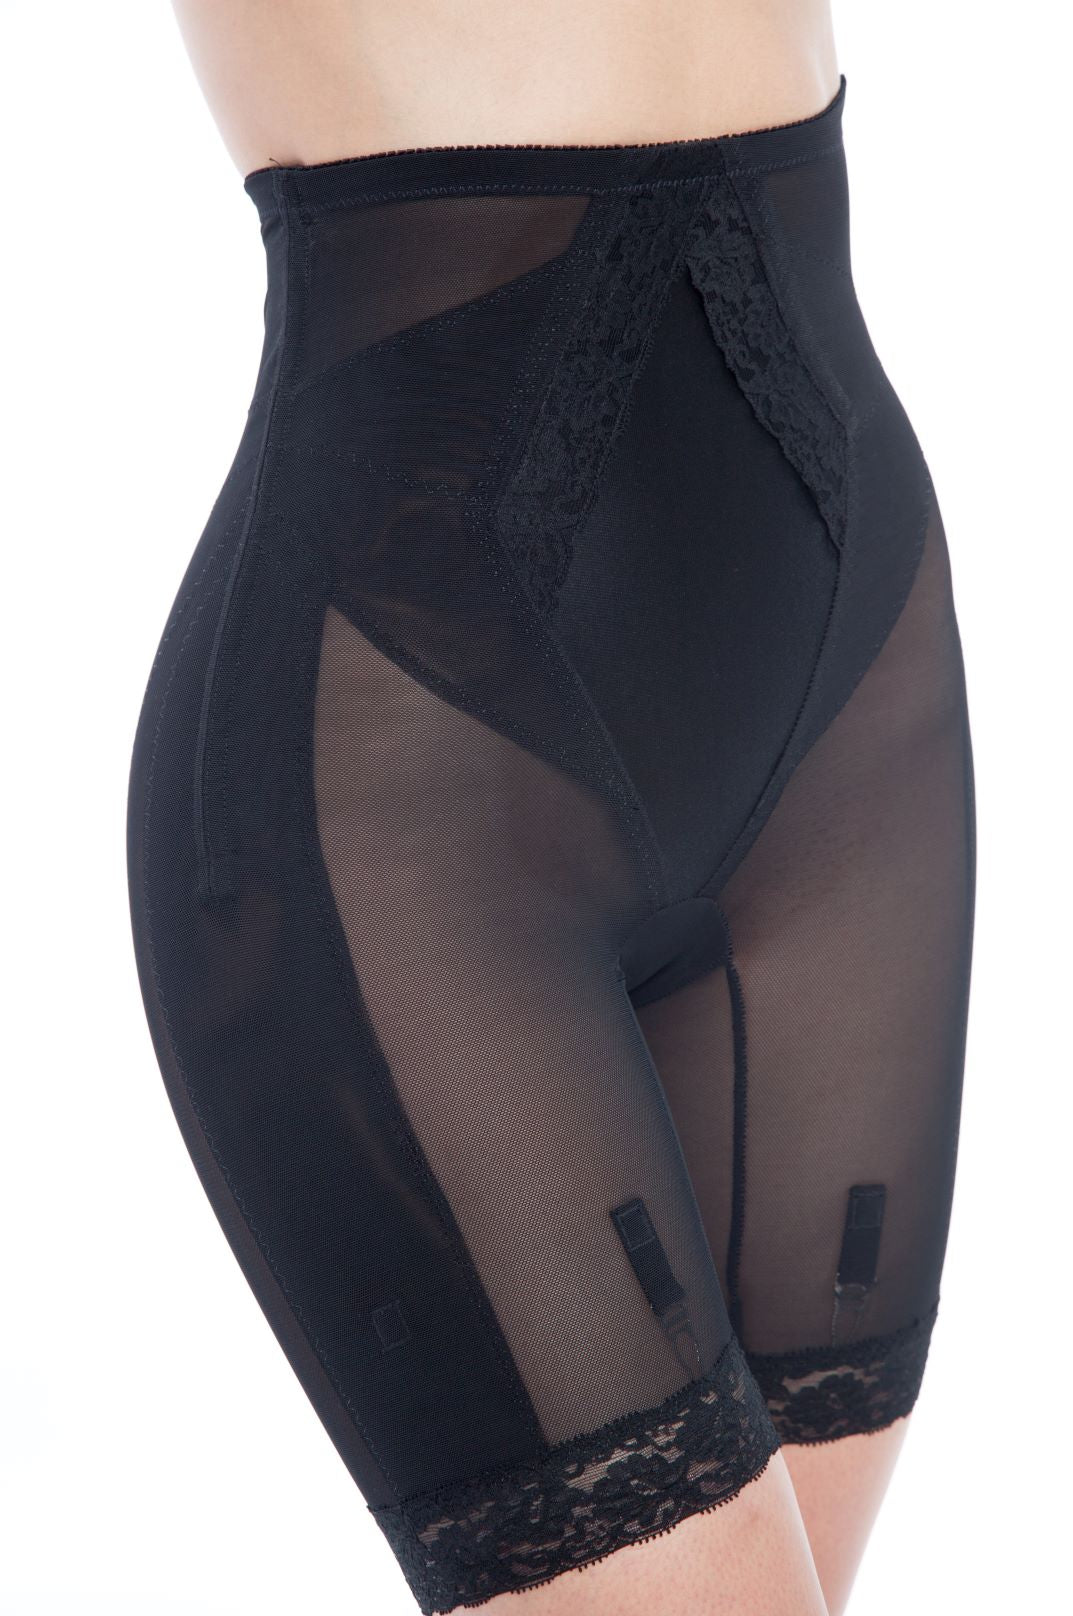 Long Leg Support Girdle (IM-6009) by Annette Renolife